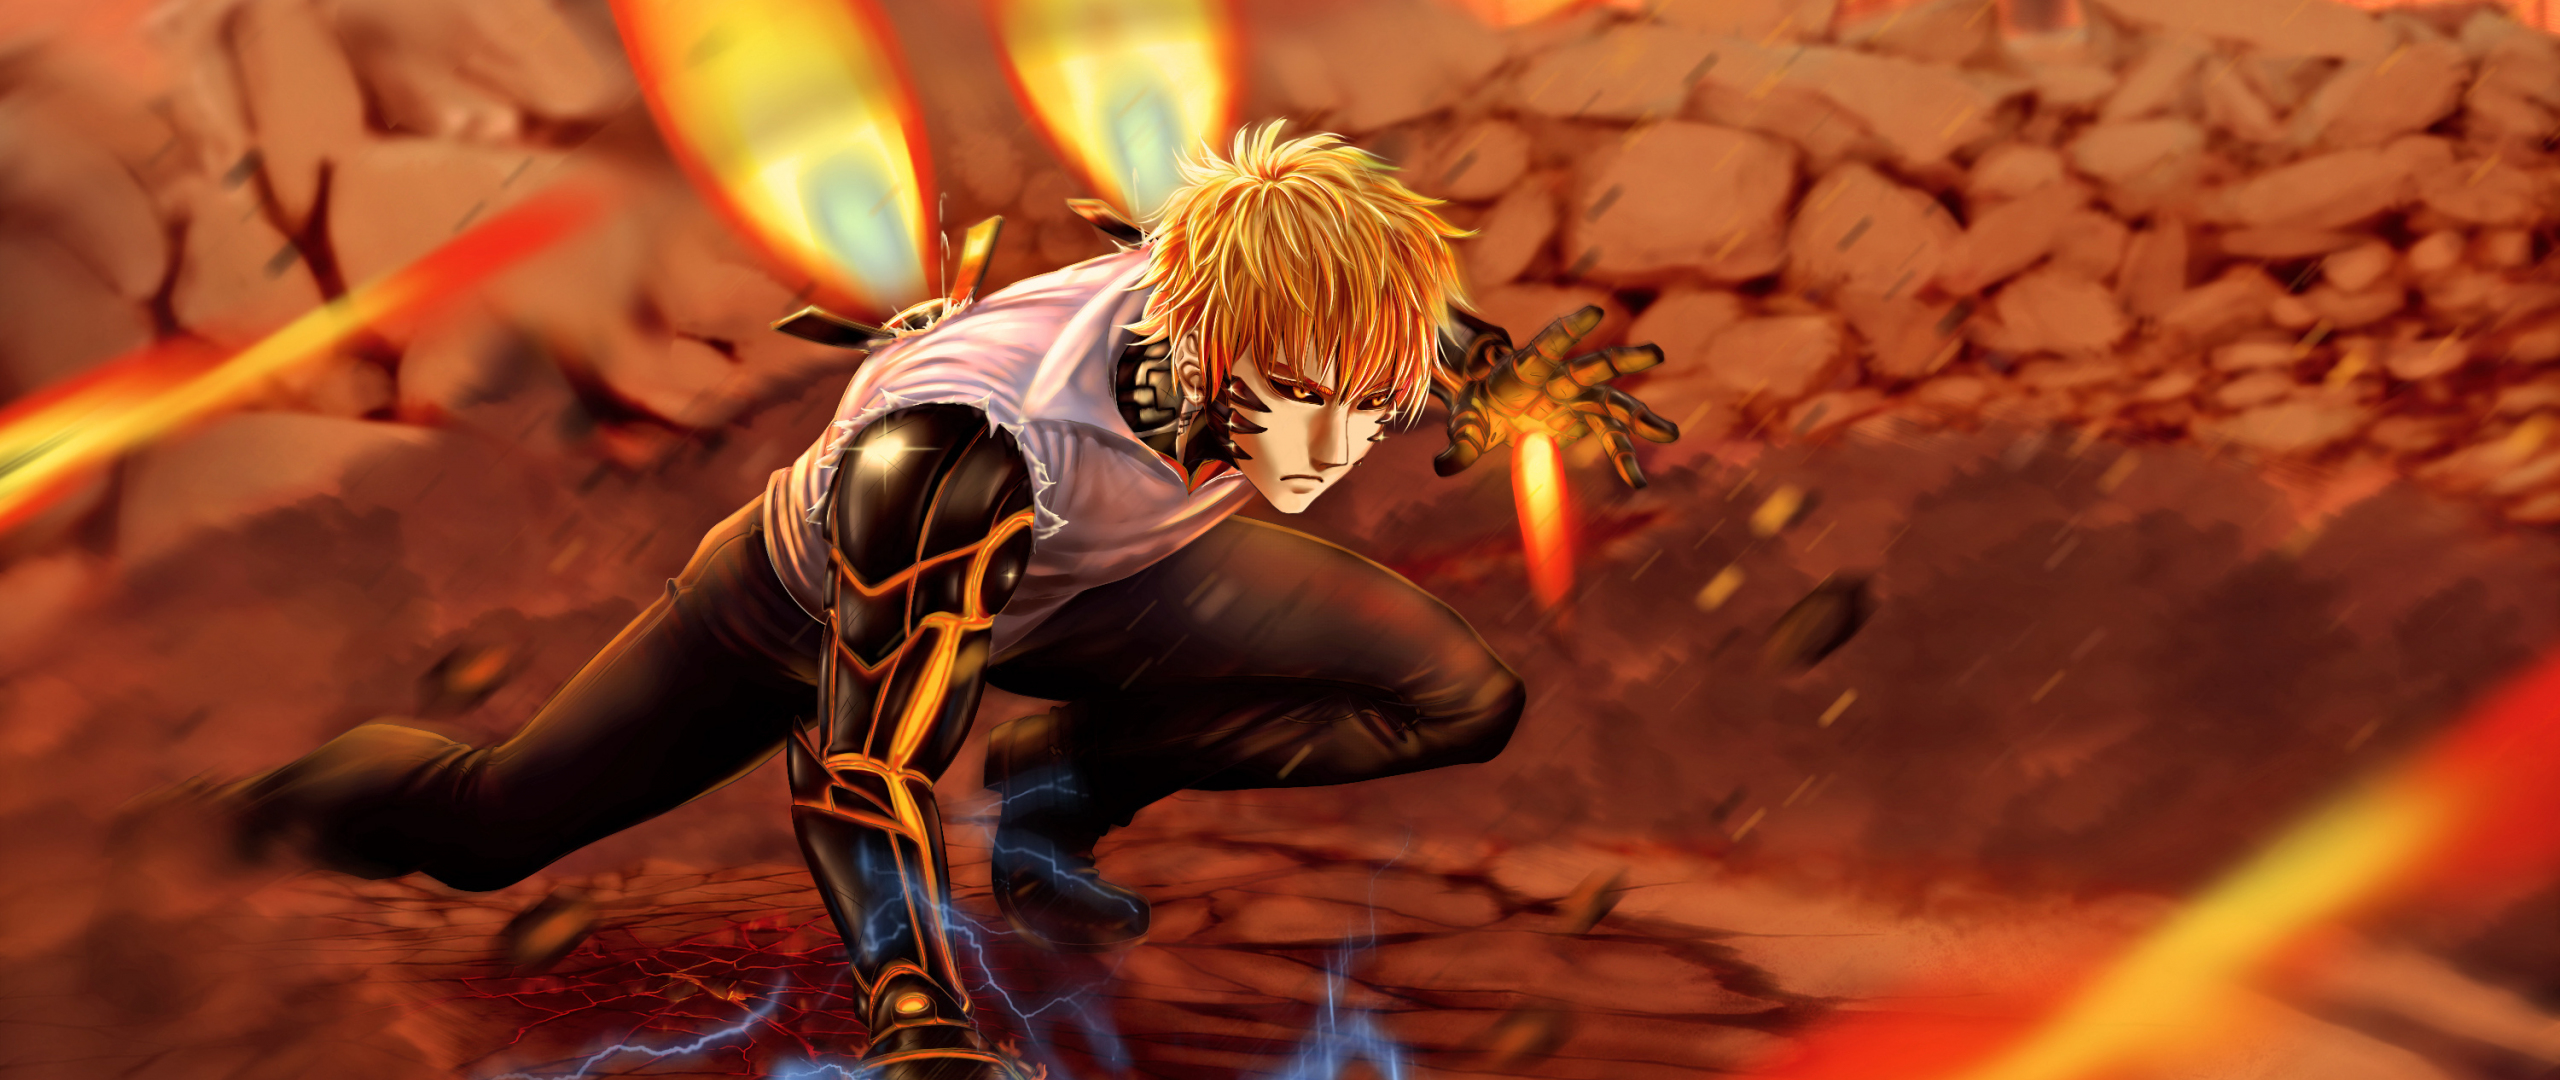 Download wallpaper 2560x1080 blonde, genos, one-punch man, dual wide  2560x1080 hd background, 21380